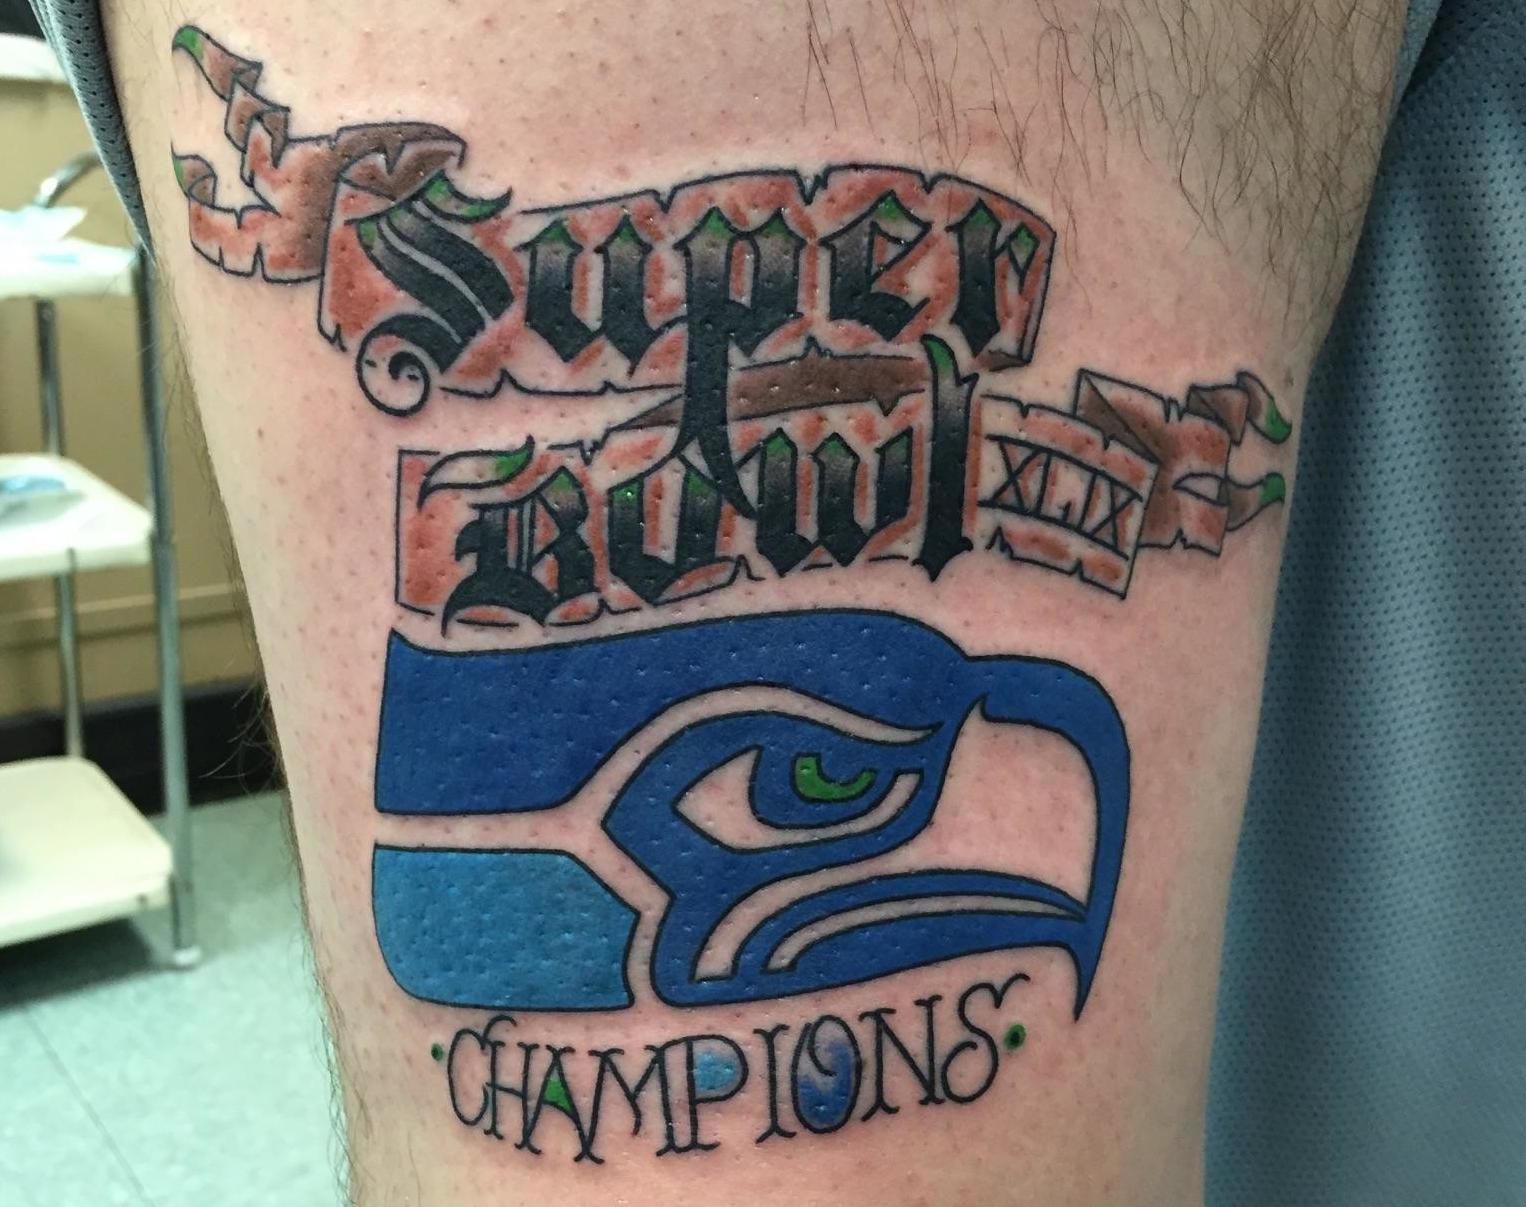 A fan who got a premature "BACK TO BACK CHAMPIONS" tattoo attempts